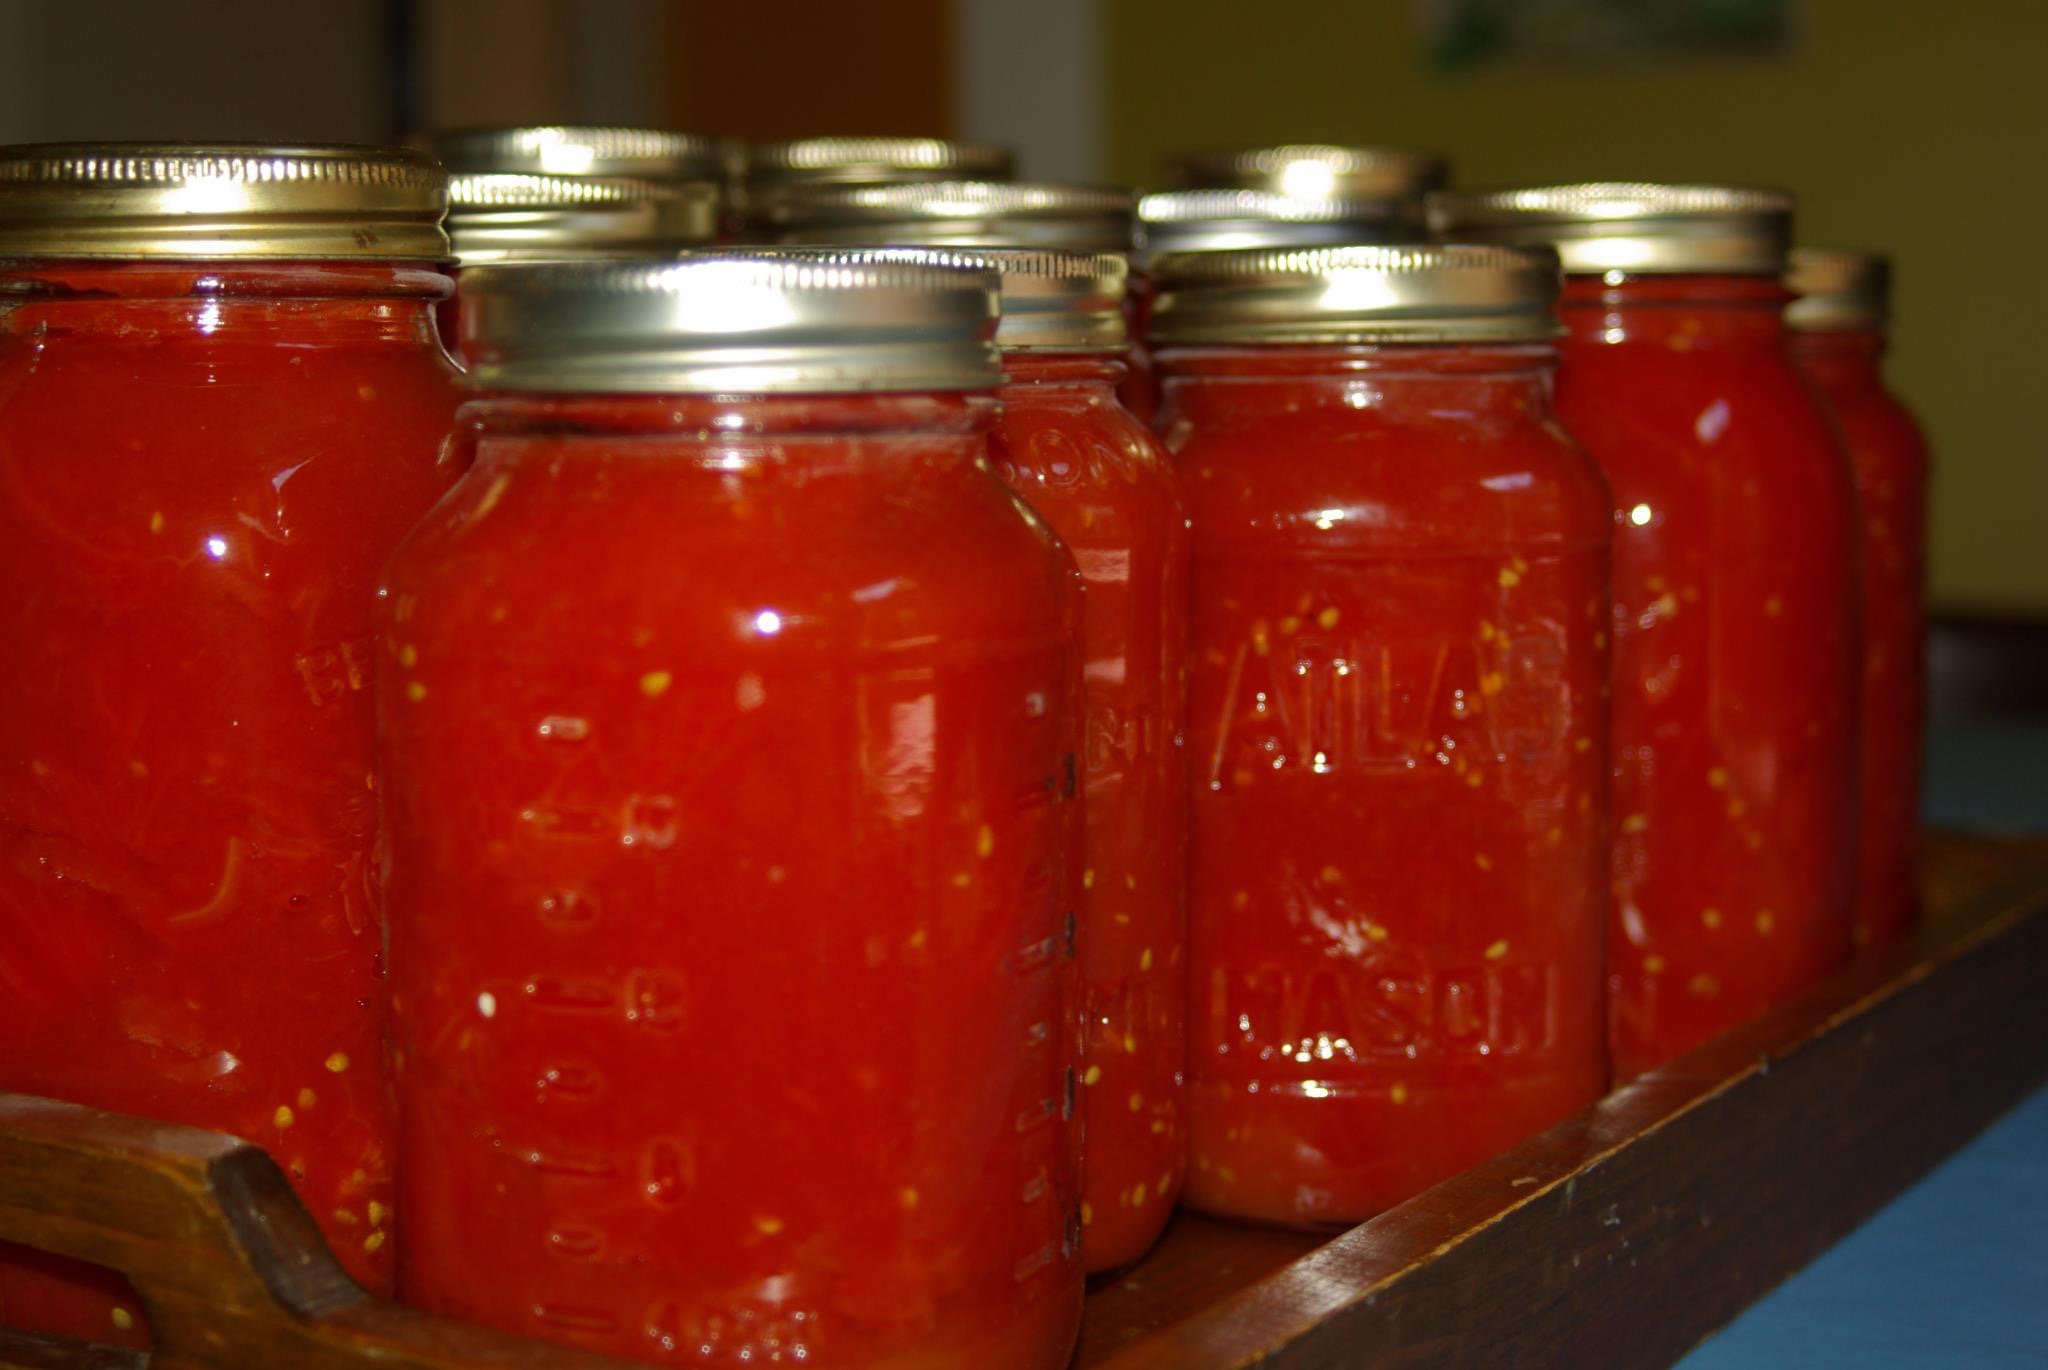 Several jars of home canned tomatoes.